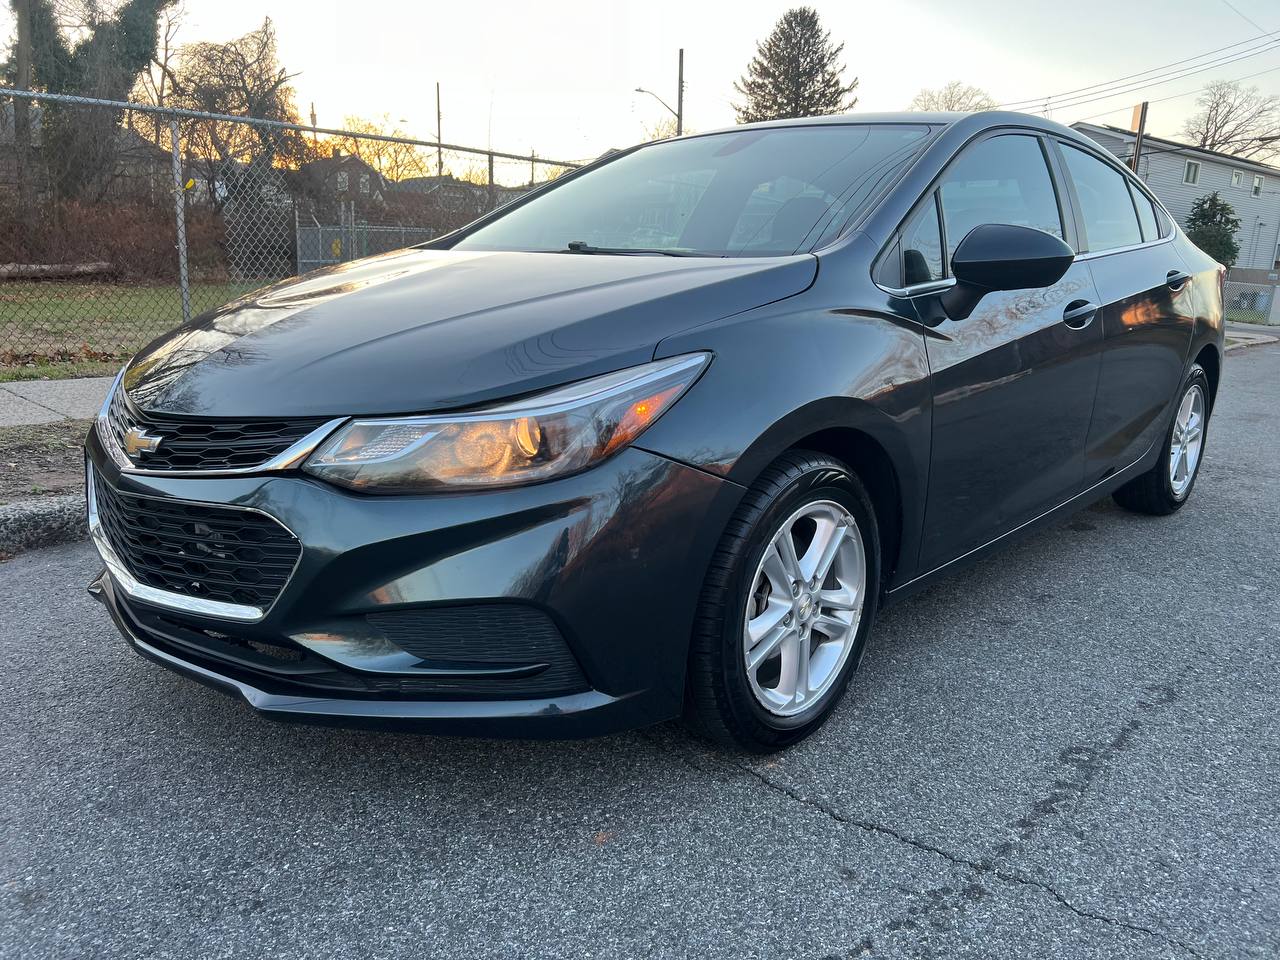 Used Car - 2017 Chevrolet Cruze LT for Sale in Staten Island, NY